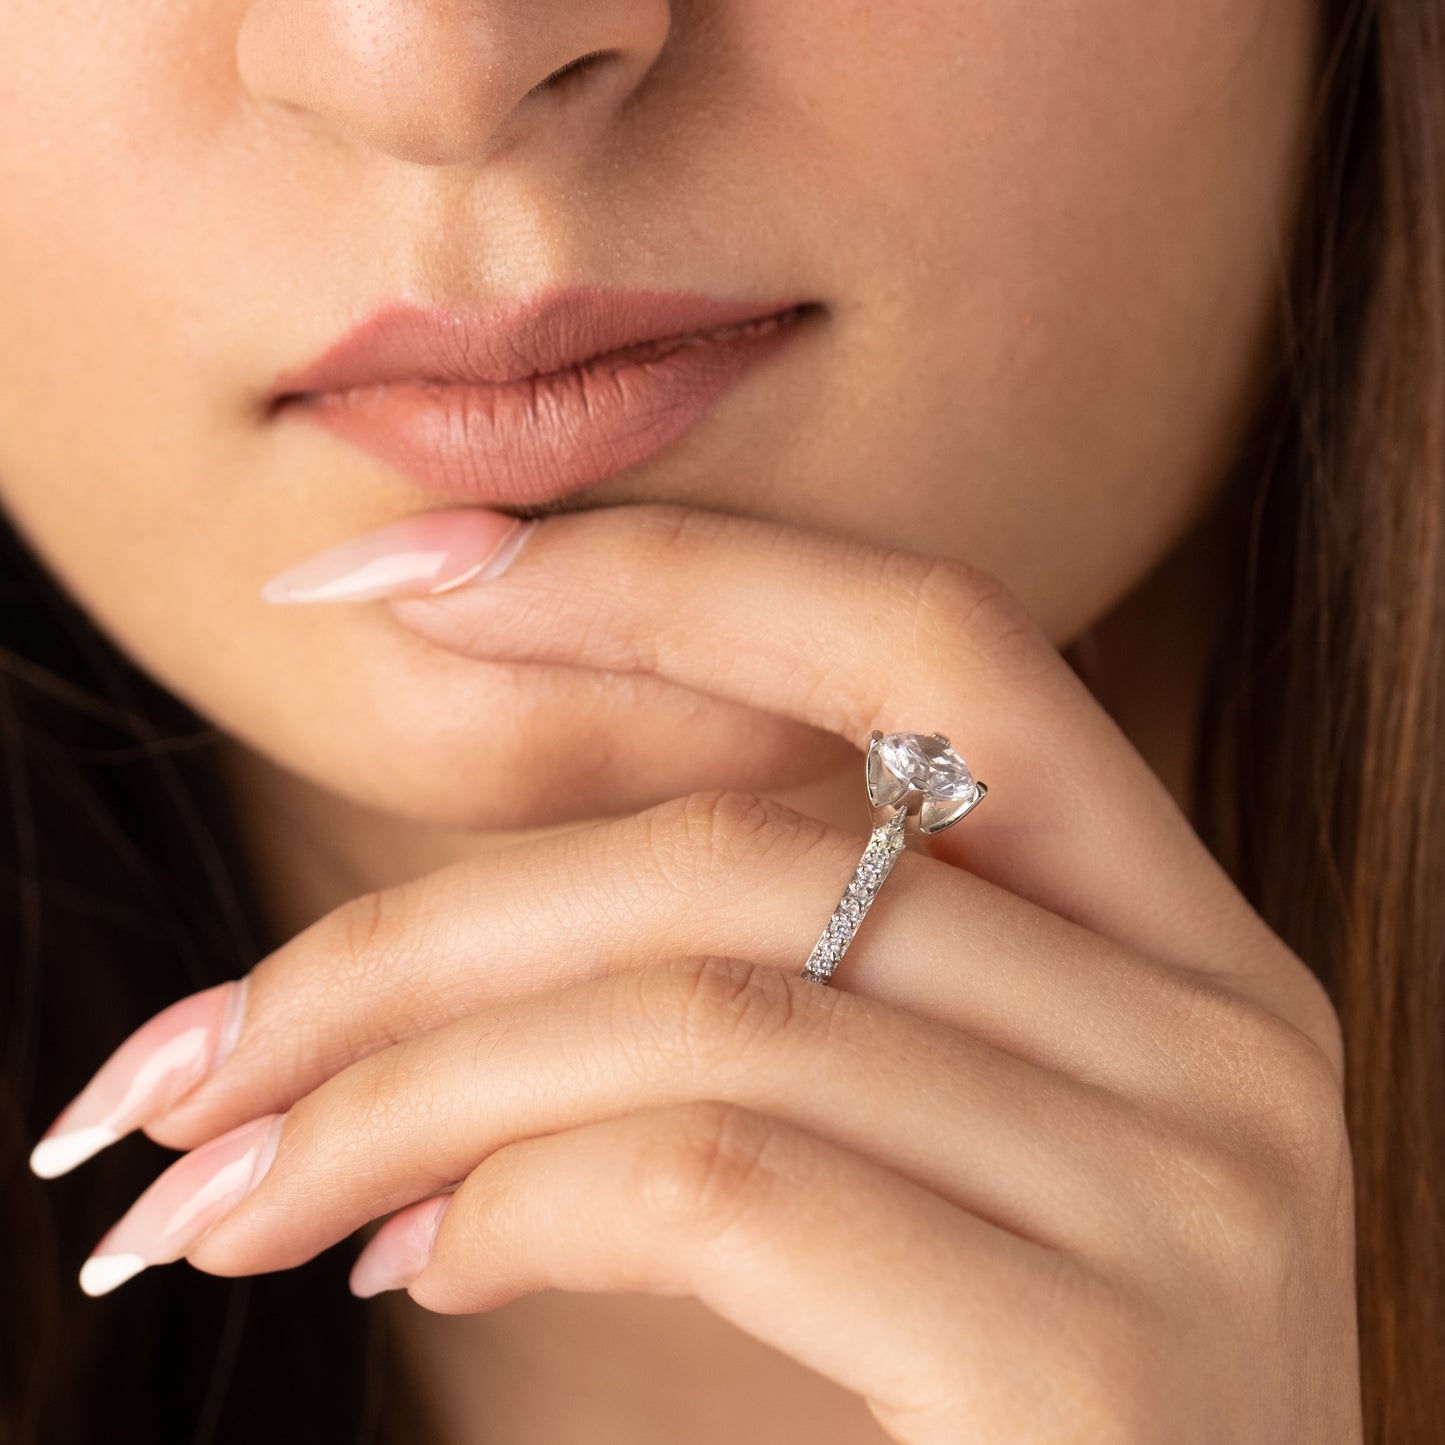 Proposal Solitaire Ring - 925 Silver